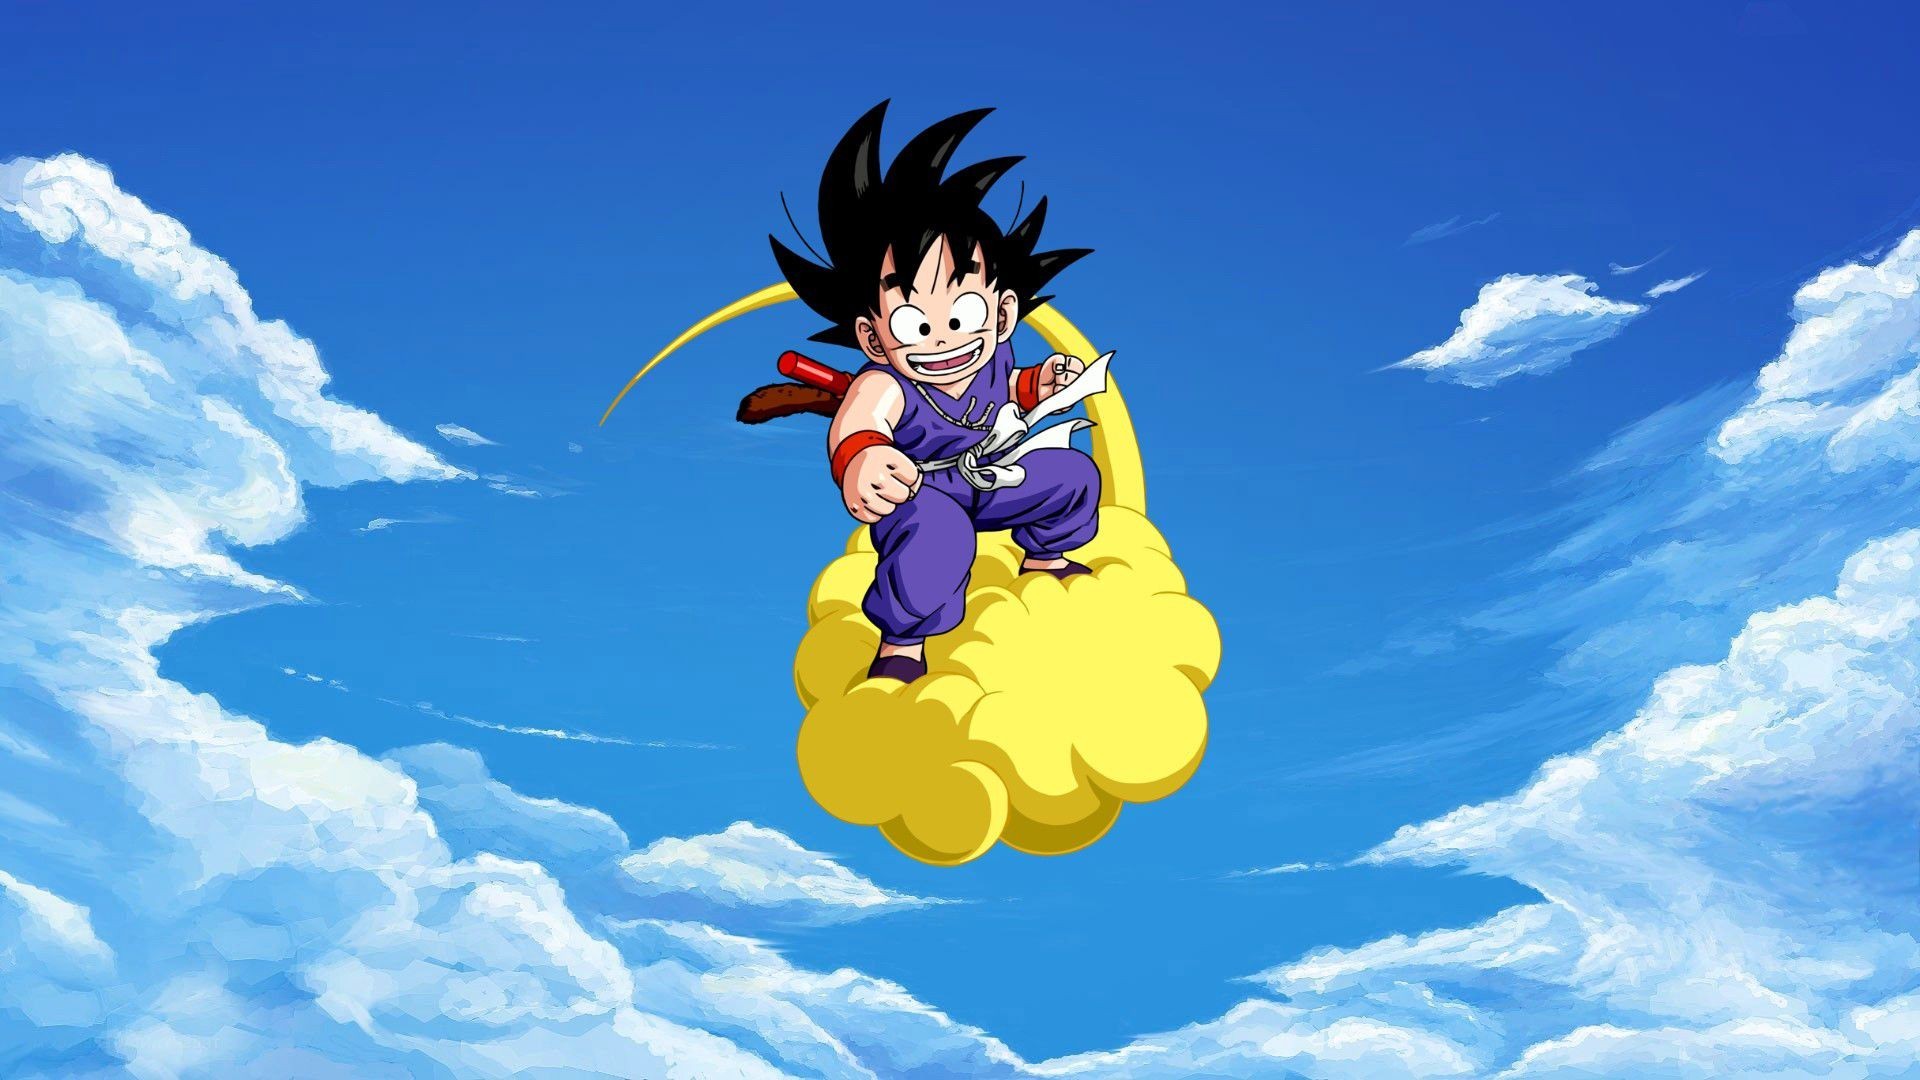 Wallpaper Kid Goku Desktop with image resolution 1920x1080 pixel. You can use this wallpaper as background for your desktop Computer Screensavers, Android or iPhone smartphones